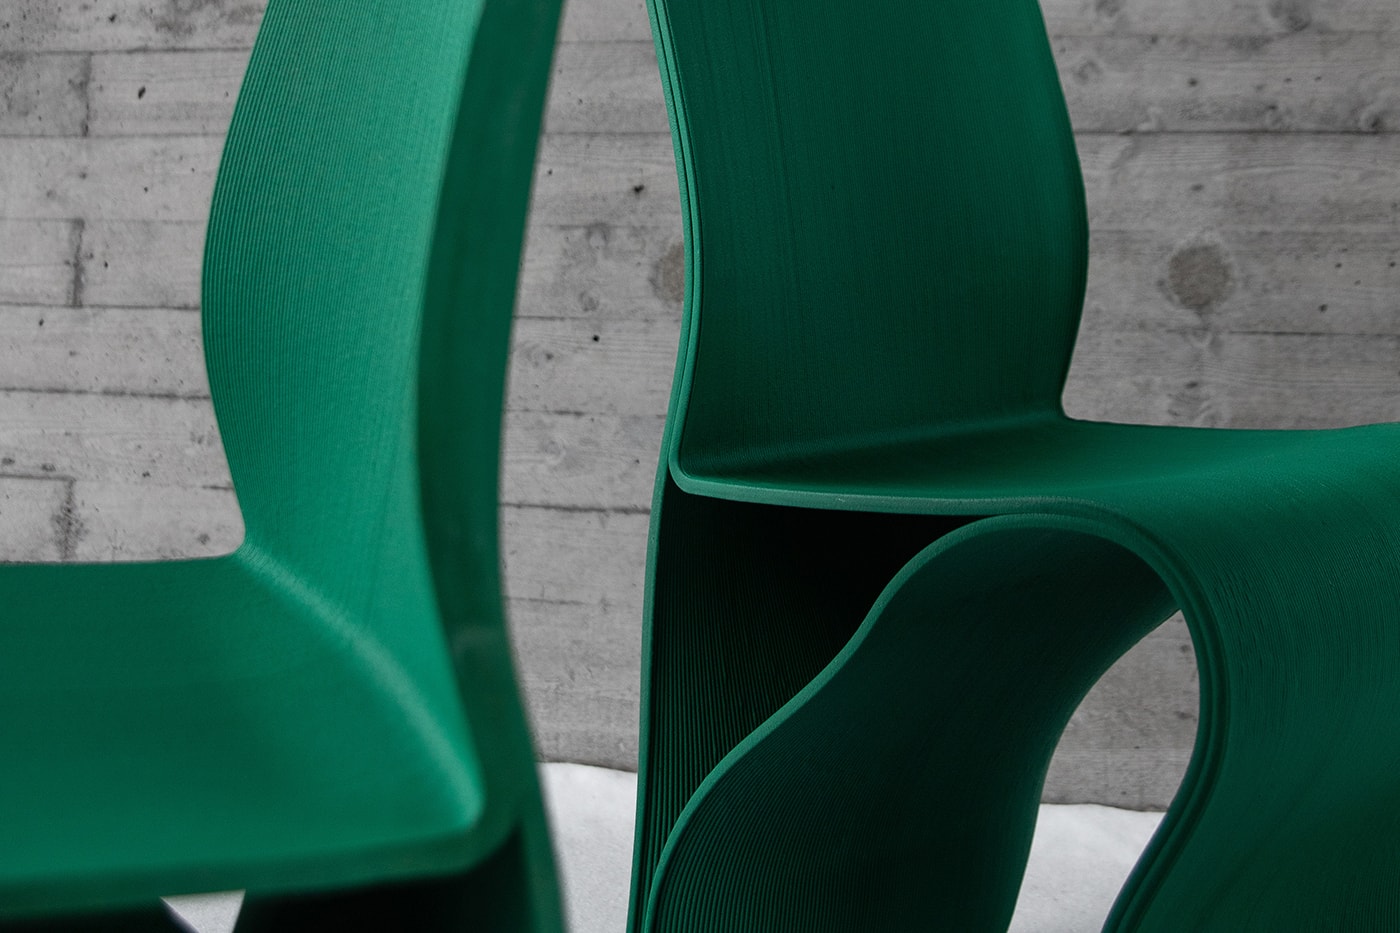 Discarded Fishing Nets Were Used to Create This 3D-Printed Chair by Interesting Times Gang